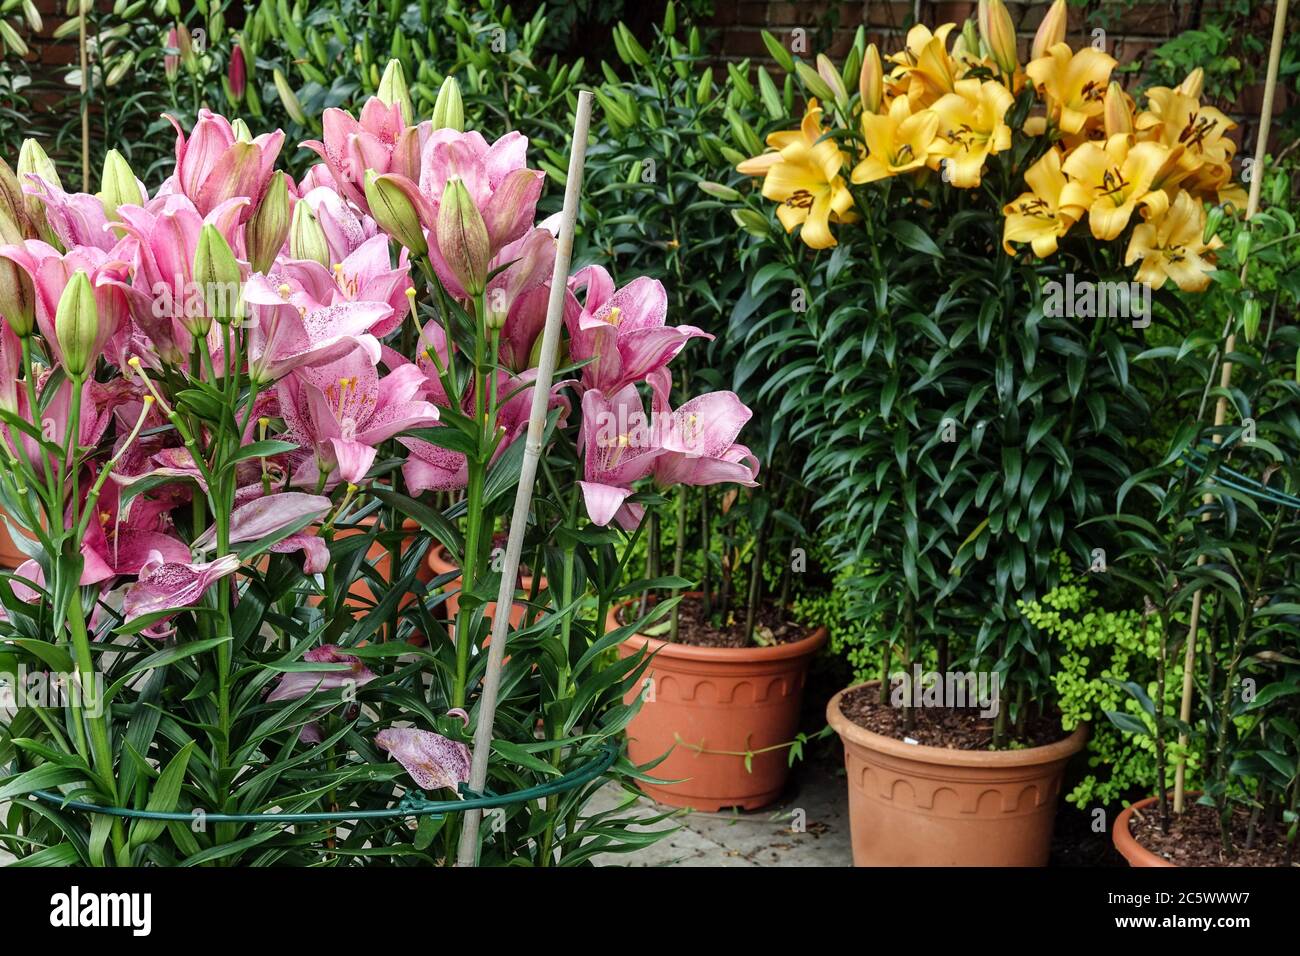 Asiatic lilies in pots Stock Photo